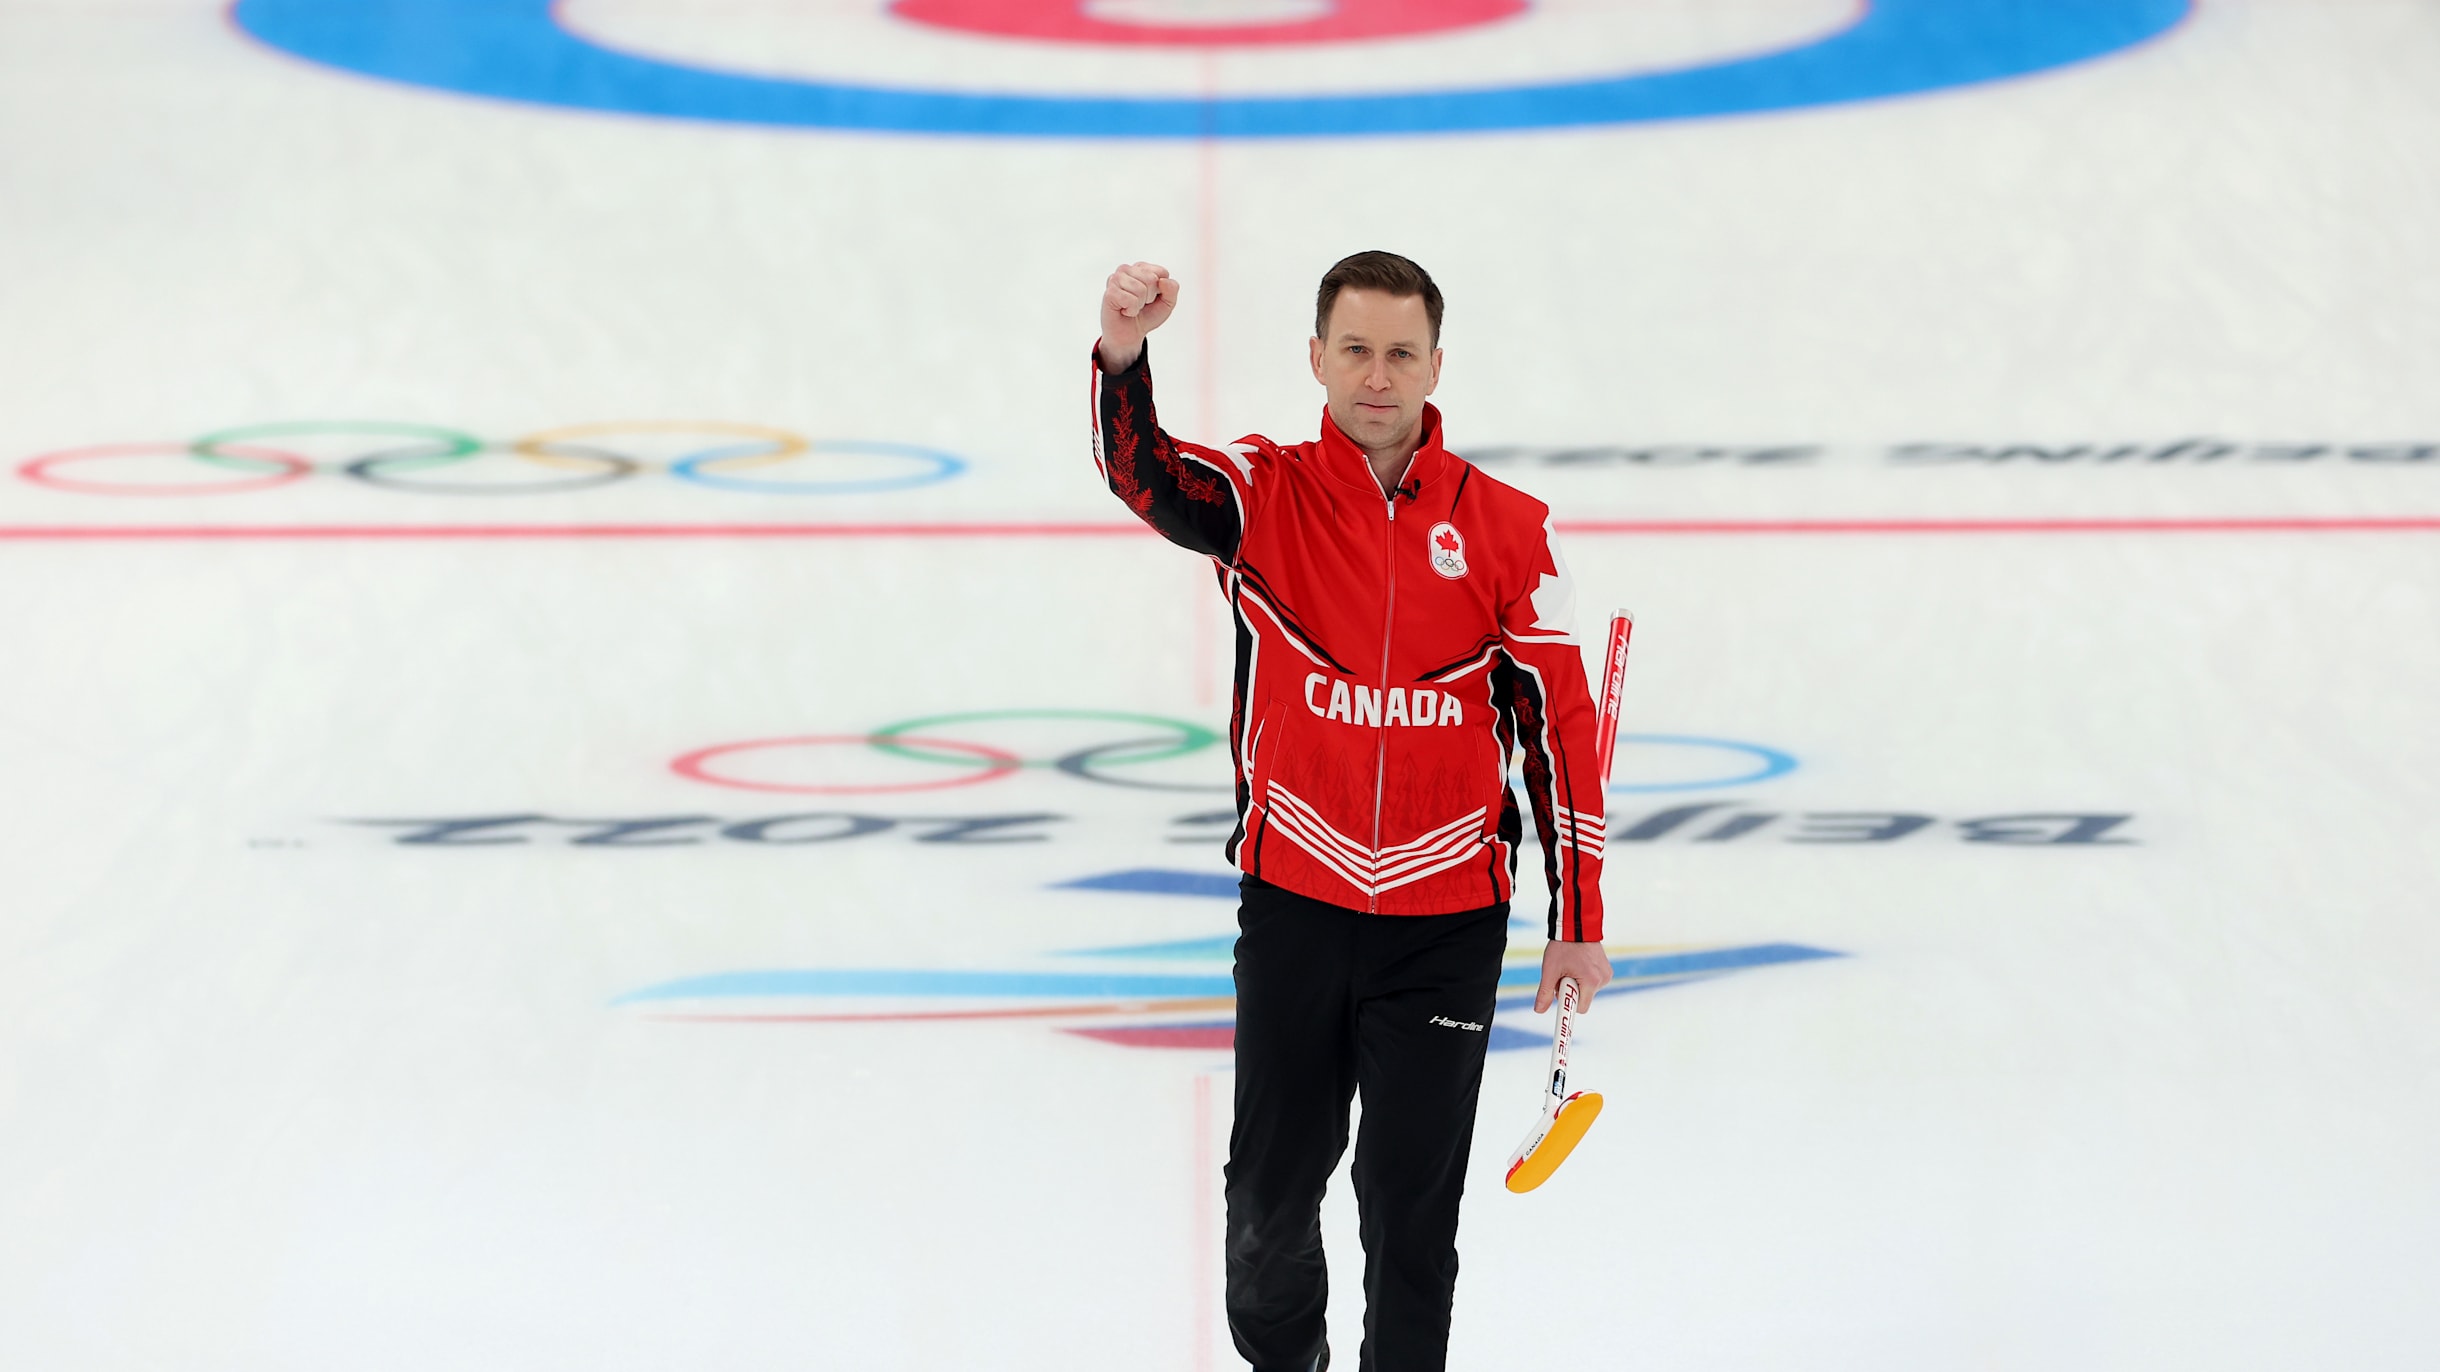 Curling Olympic bronze medal winning skip Brad Gushue wins fourth Brier title with three men